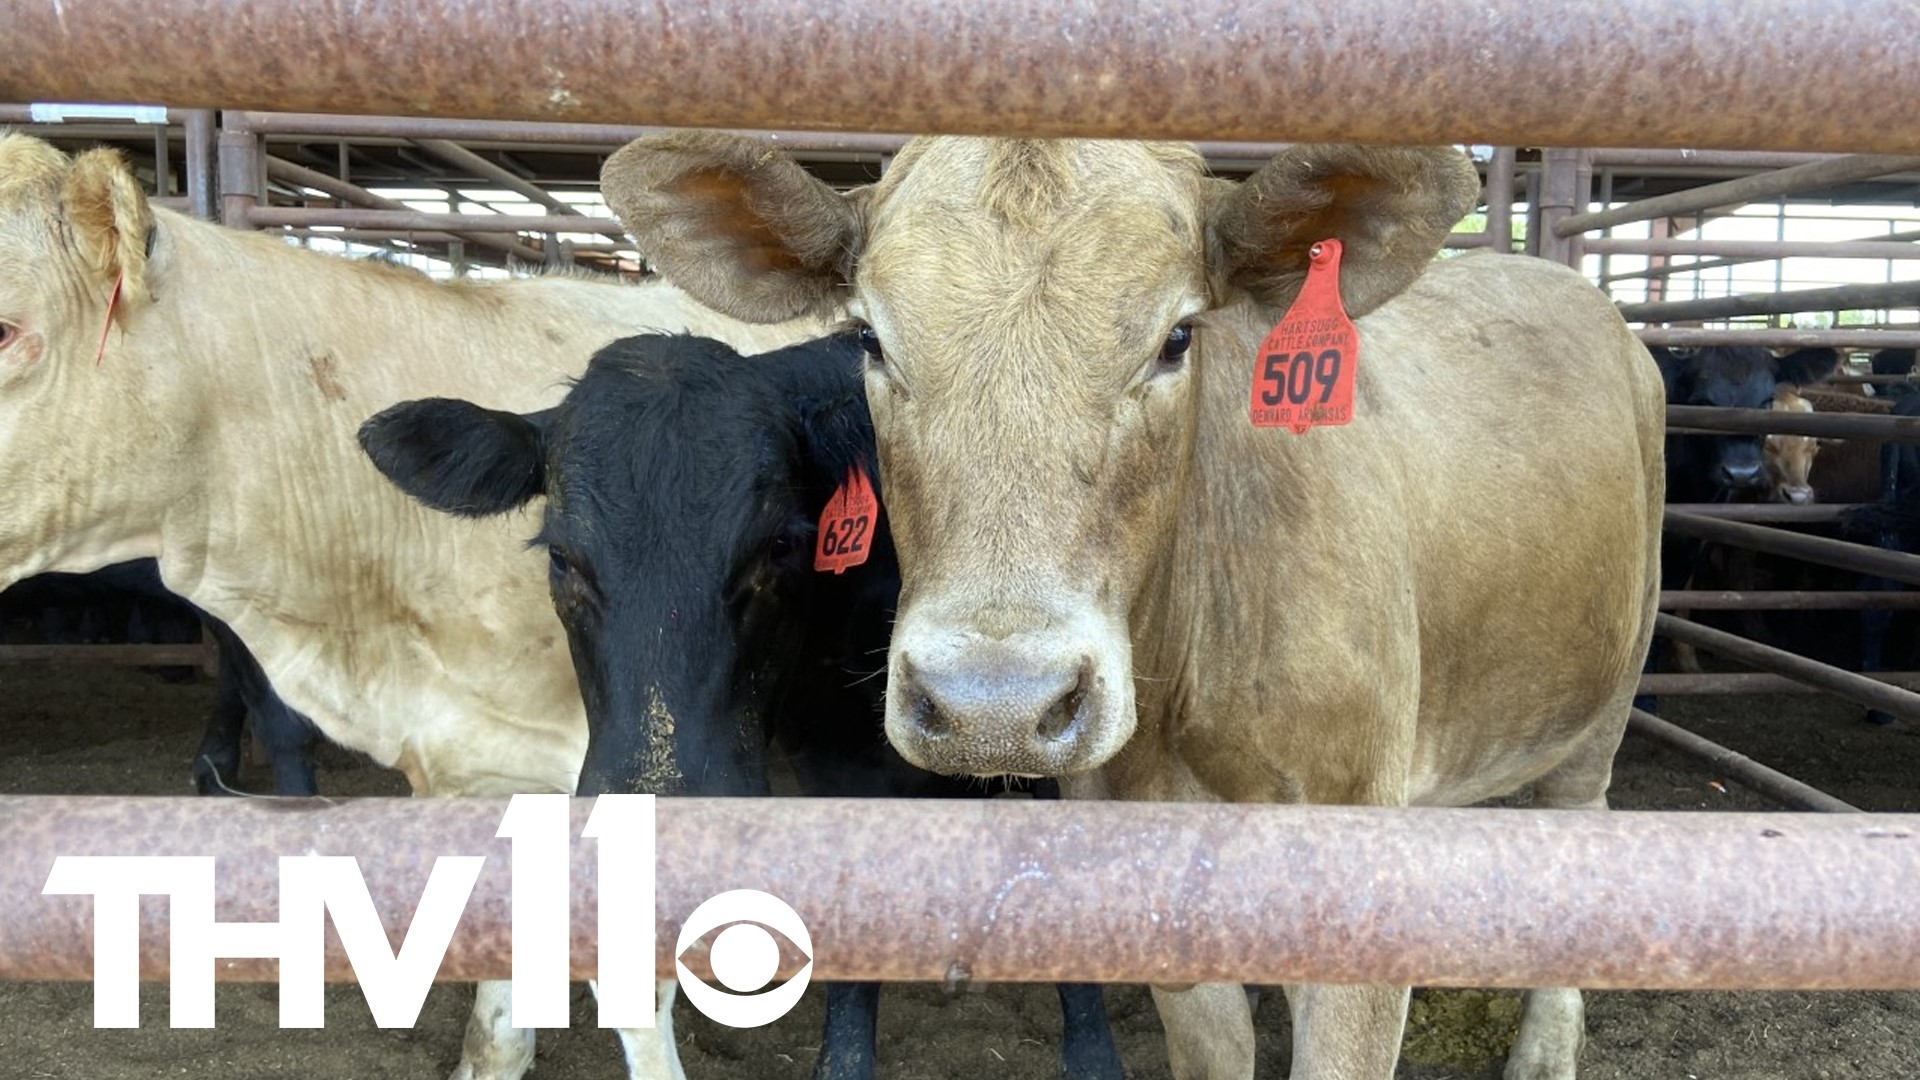 The dry weather and heat have been causing problems for livestock in Arkansas. It's forcing some ranchers to make the tough decision to sell off their cattle.